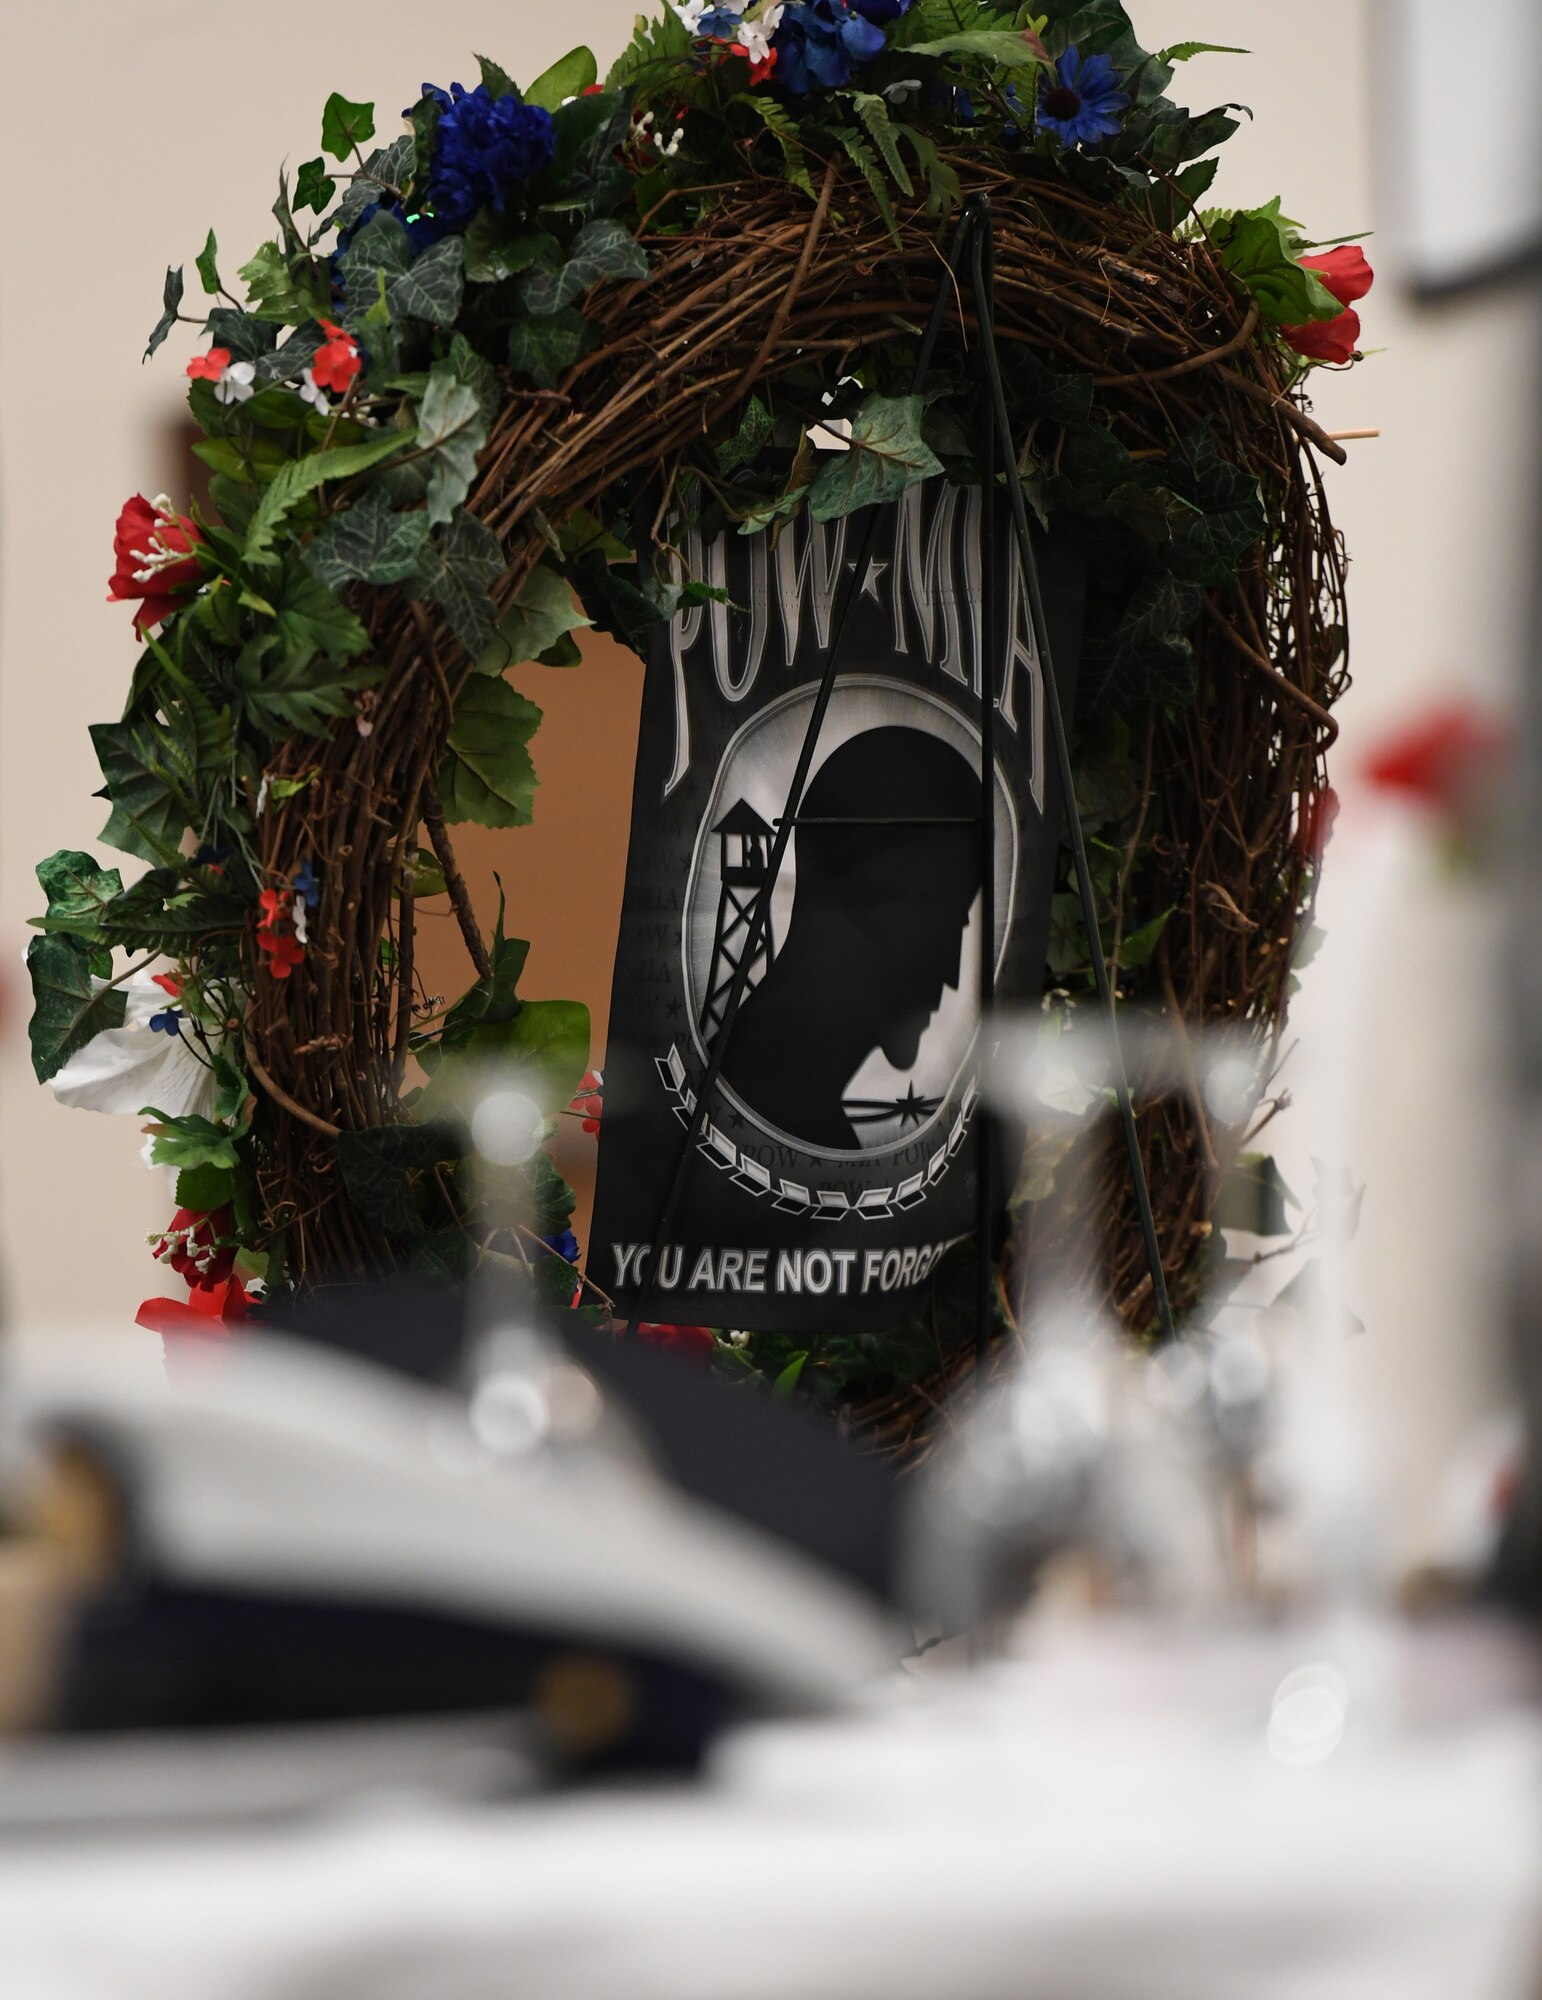 A wreath is on display during the POW/MIA remembrance luncheon inside the Roberts Consolidated Aircraft Maintenance Facility at Keesler Air Force Base, Mississippi, Sept. 20, 2019. The event, hosted by the Air Force Sergeants Association, was held to raise awareness and to pay tribute to all prisoners of war and those military members still missing in action. (U.S. Air Force photo by Kemberly Groue)